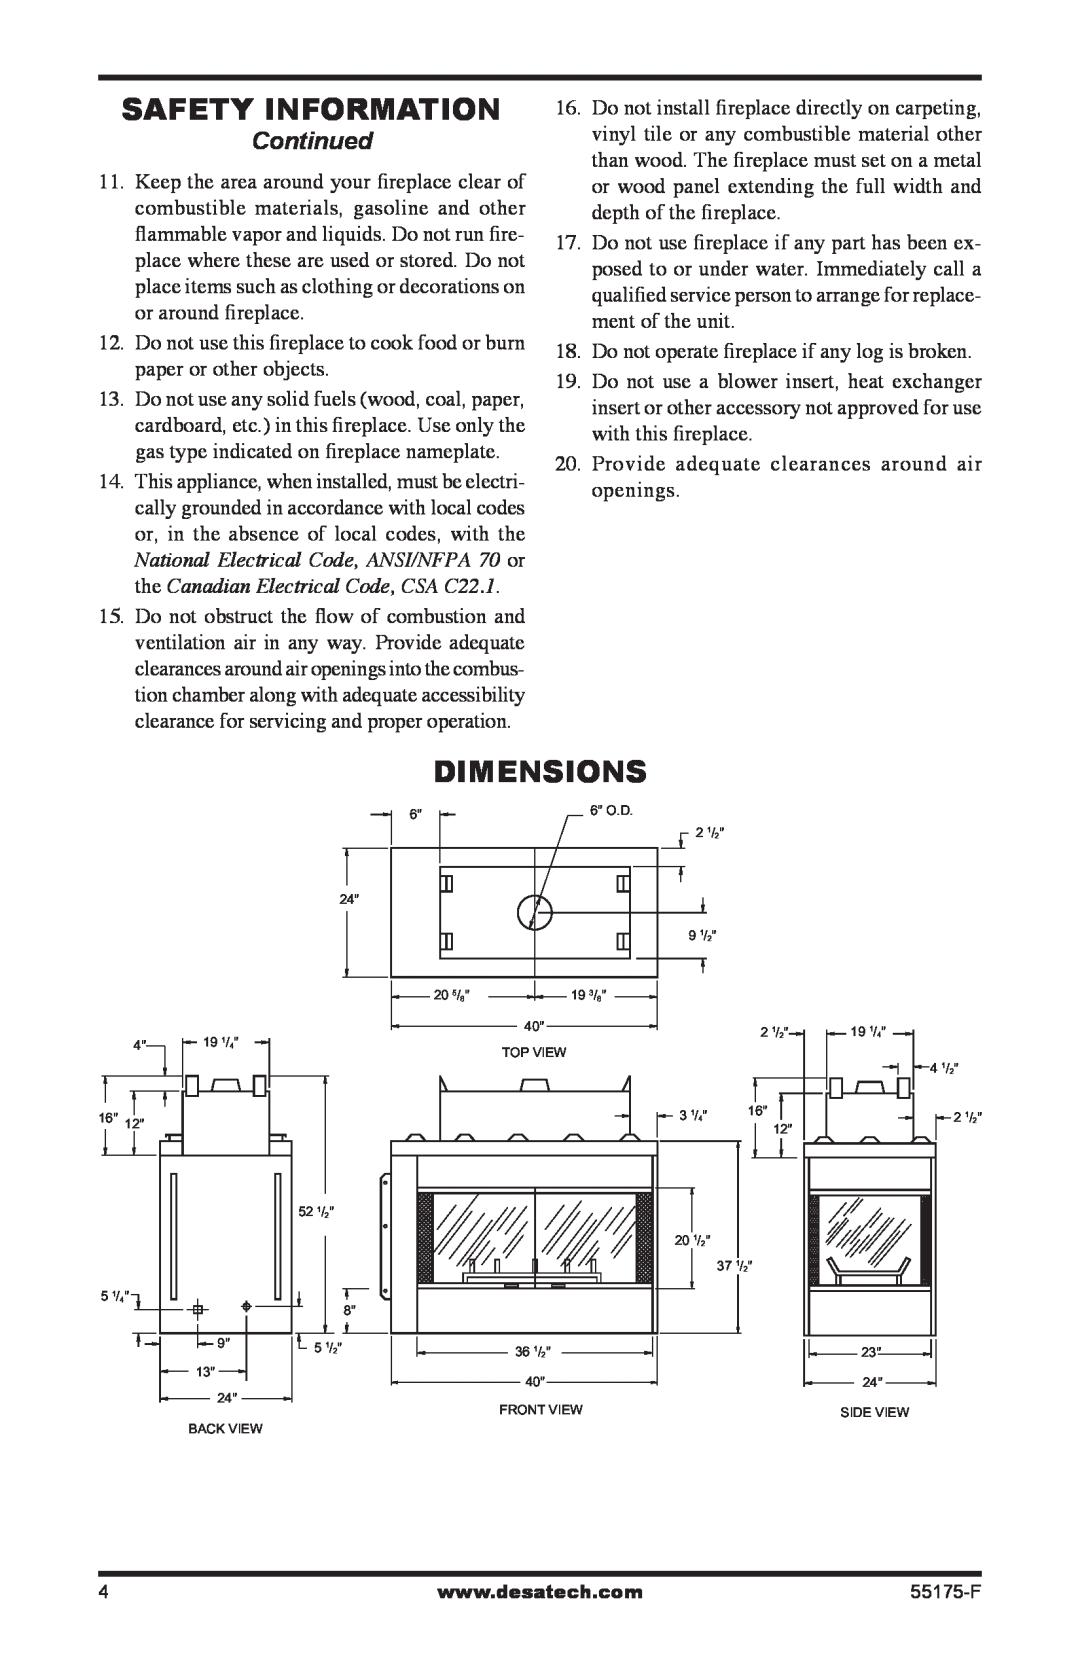 Desa GL36PNP, GL36PNEP installation manual Safety Information, Dimensions, Continued 